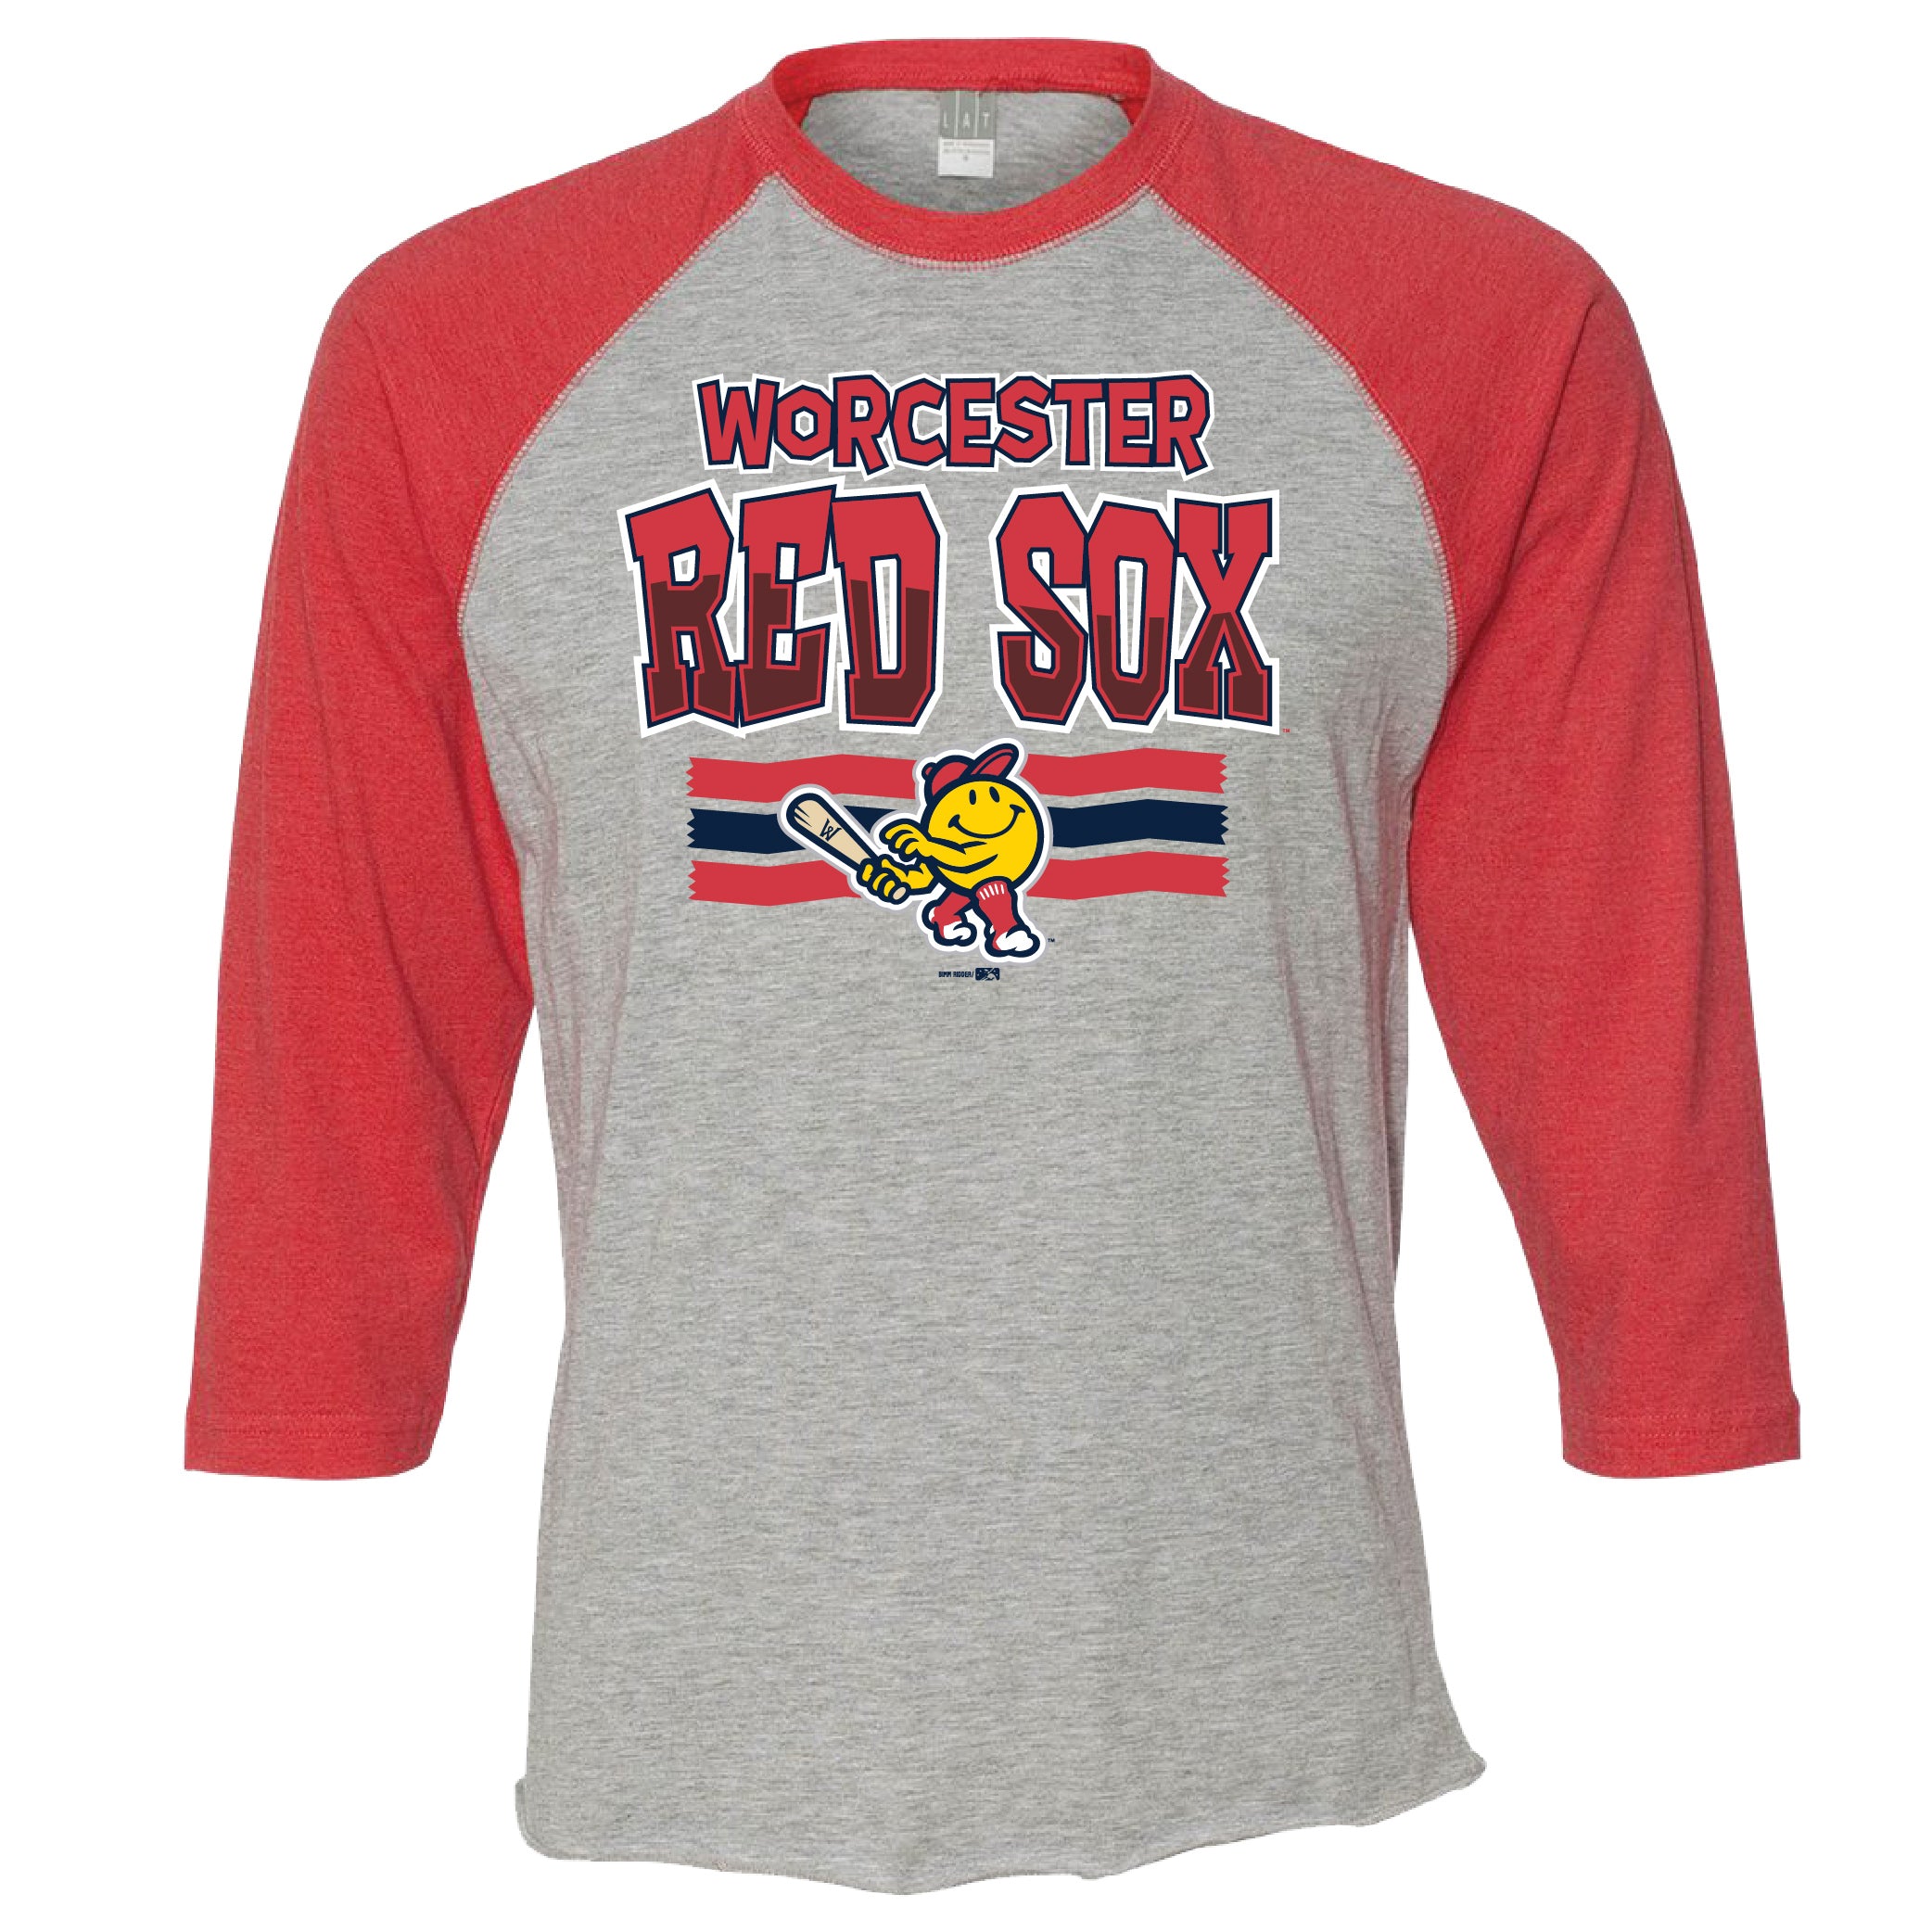 Worcester Red Sox Bimm Ridder Heather Red Theory Youth Raglan LG